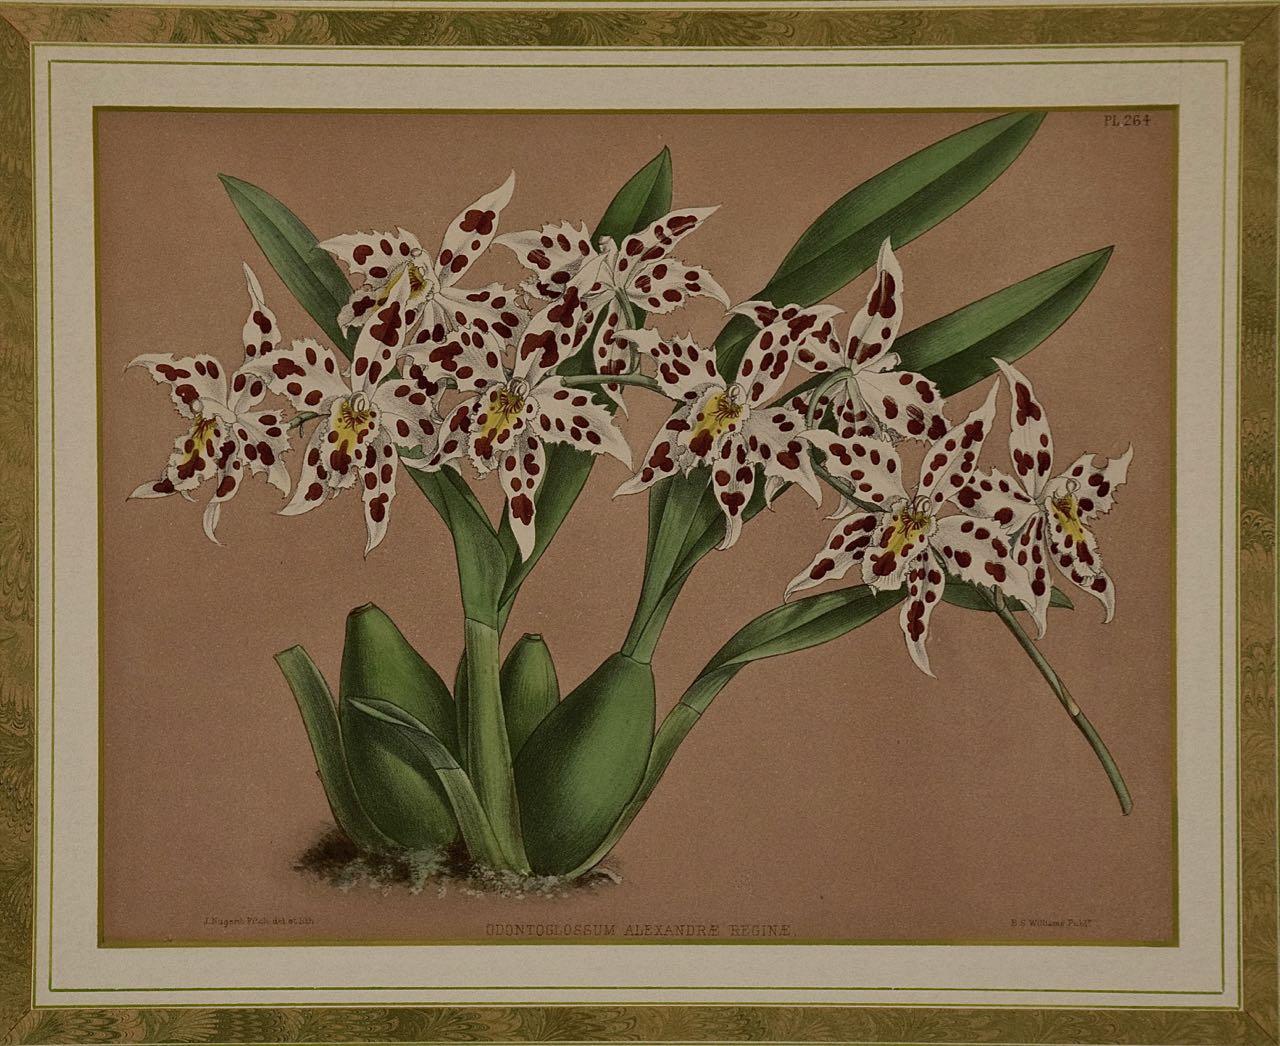 Orchids: Framed 19th C. Hand-colored lithograph of 